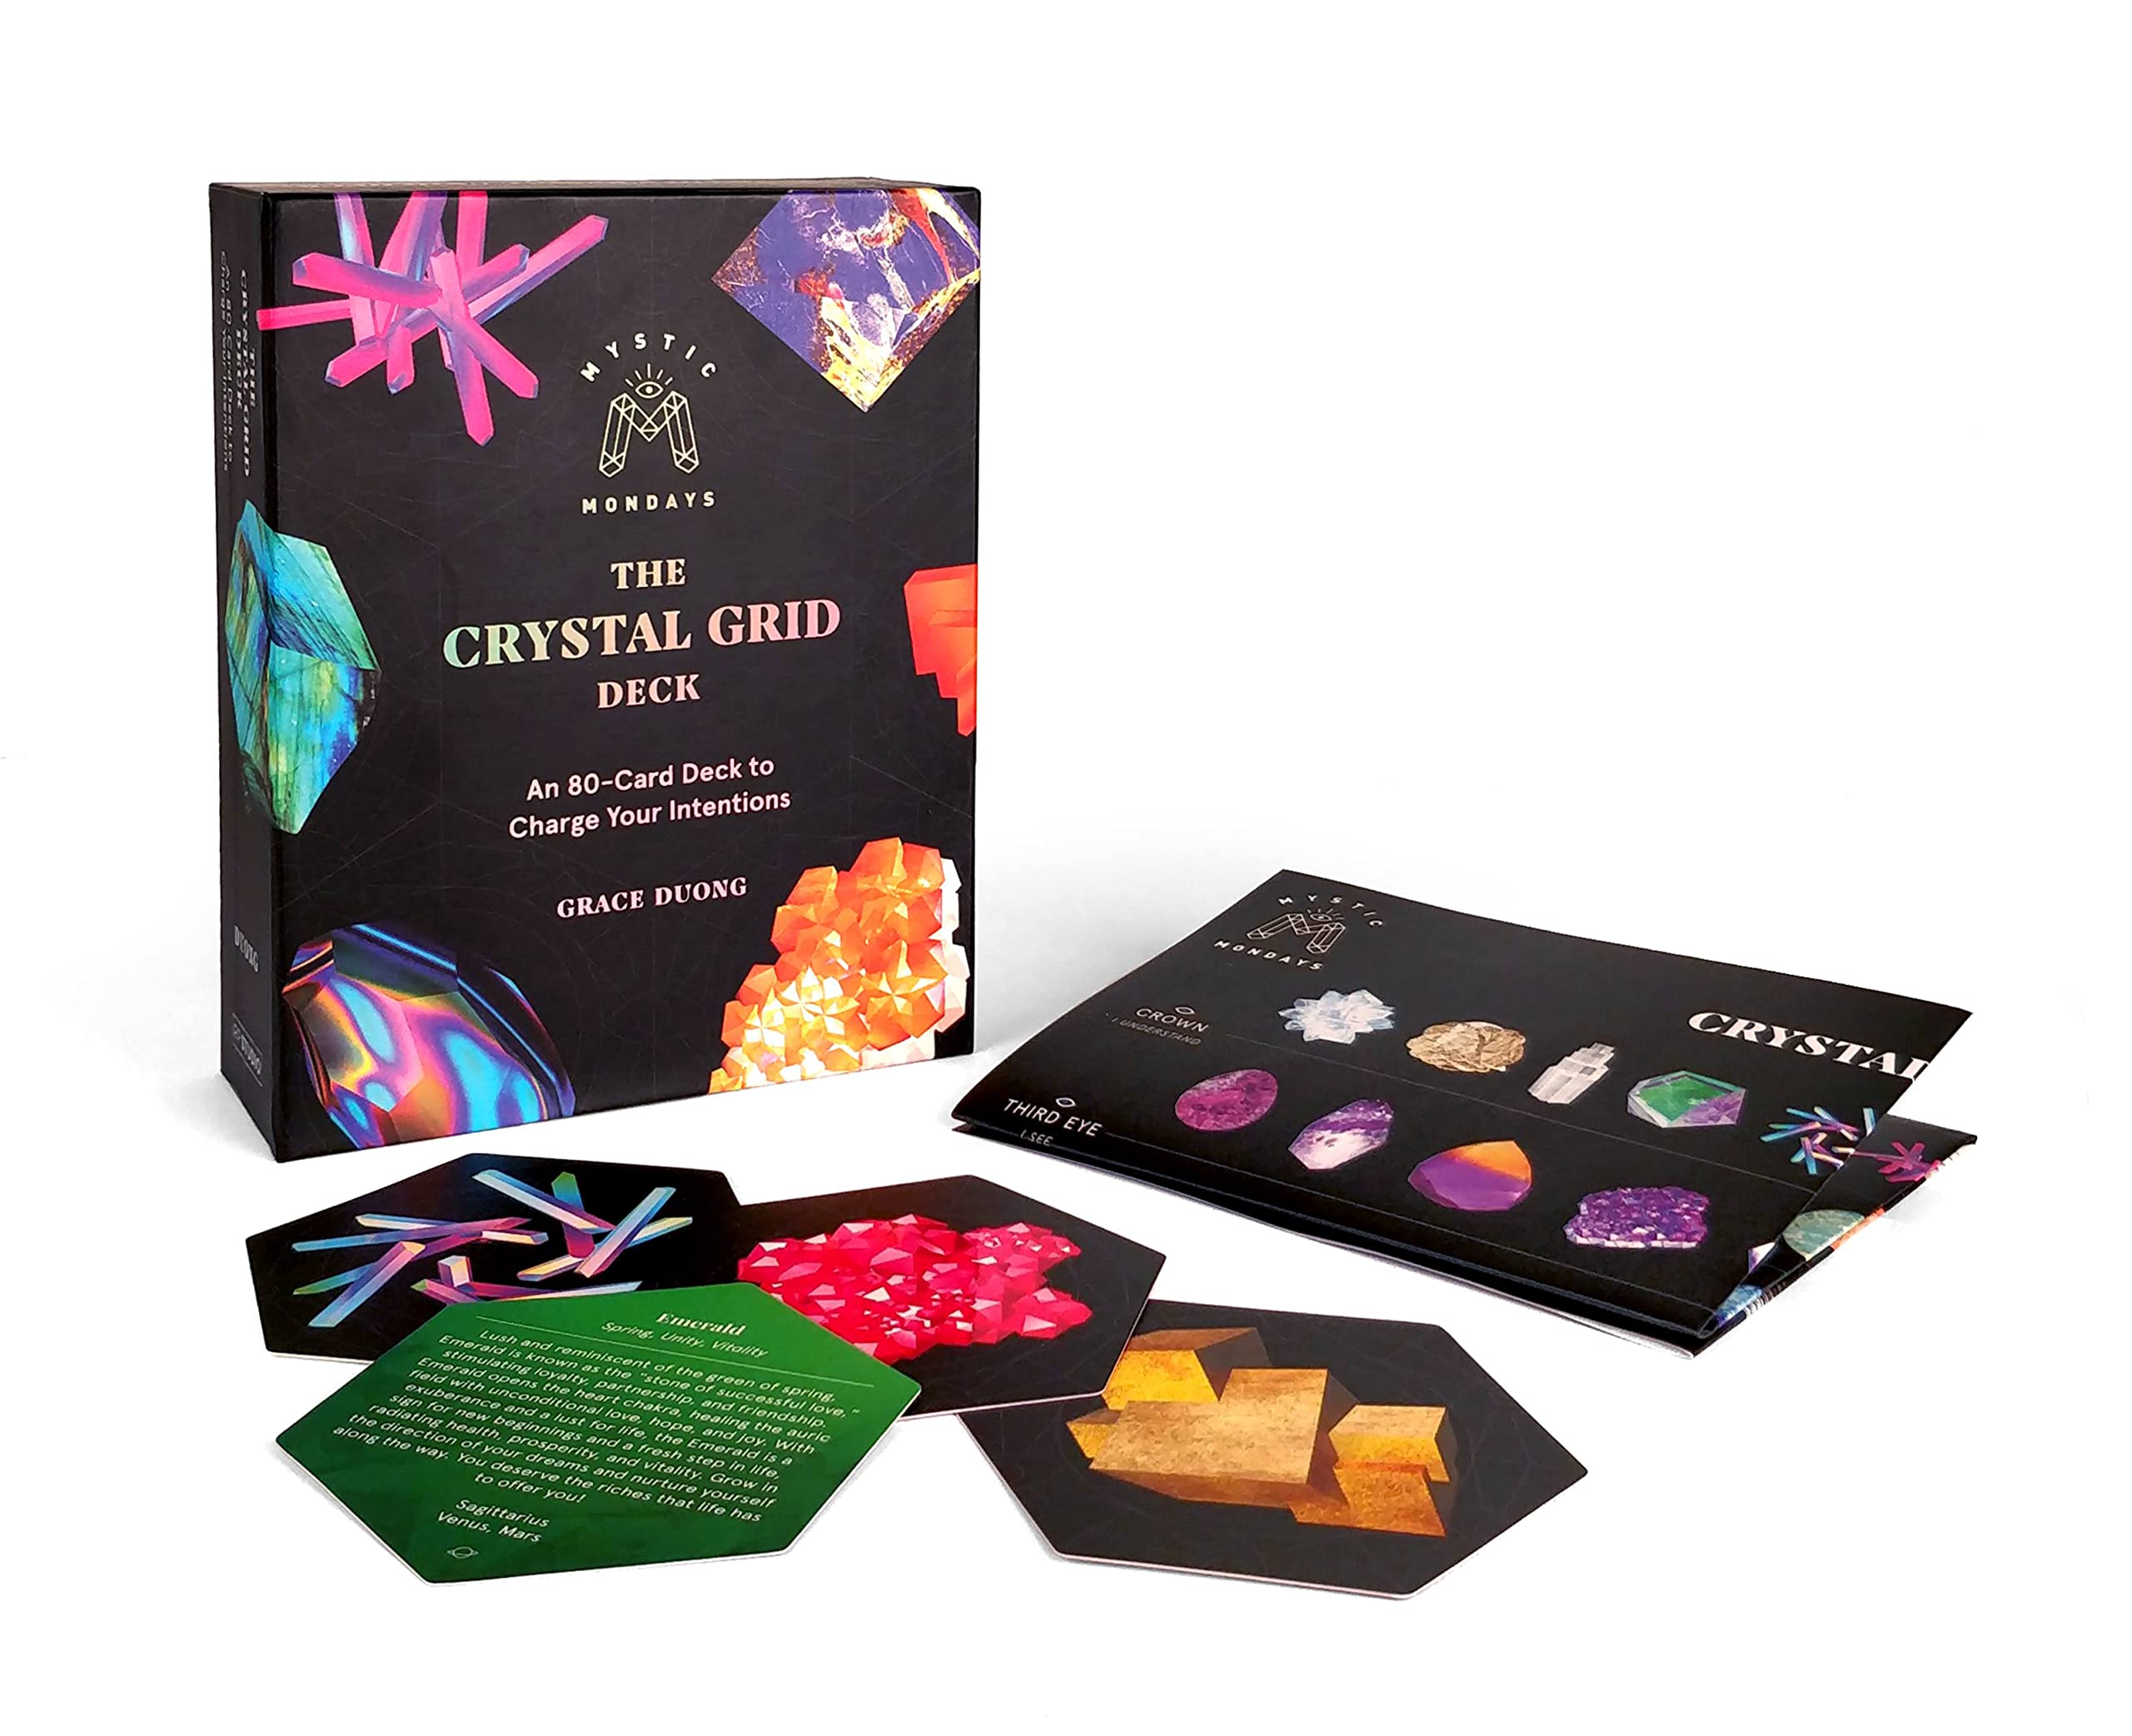 Mystic Mondays: The Crystal Grid Deck- An 80-Card Deck to Charge Your Intentions